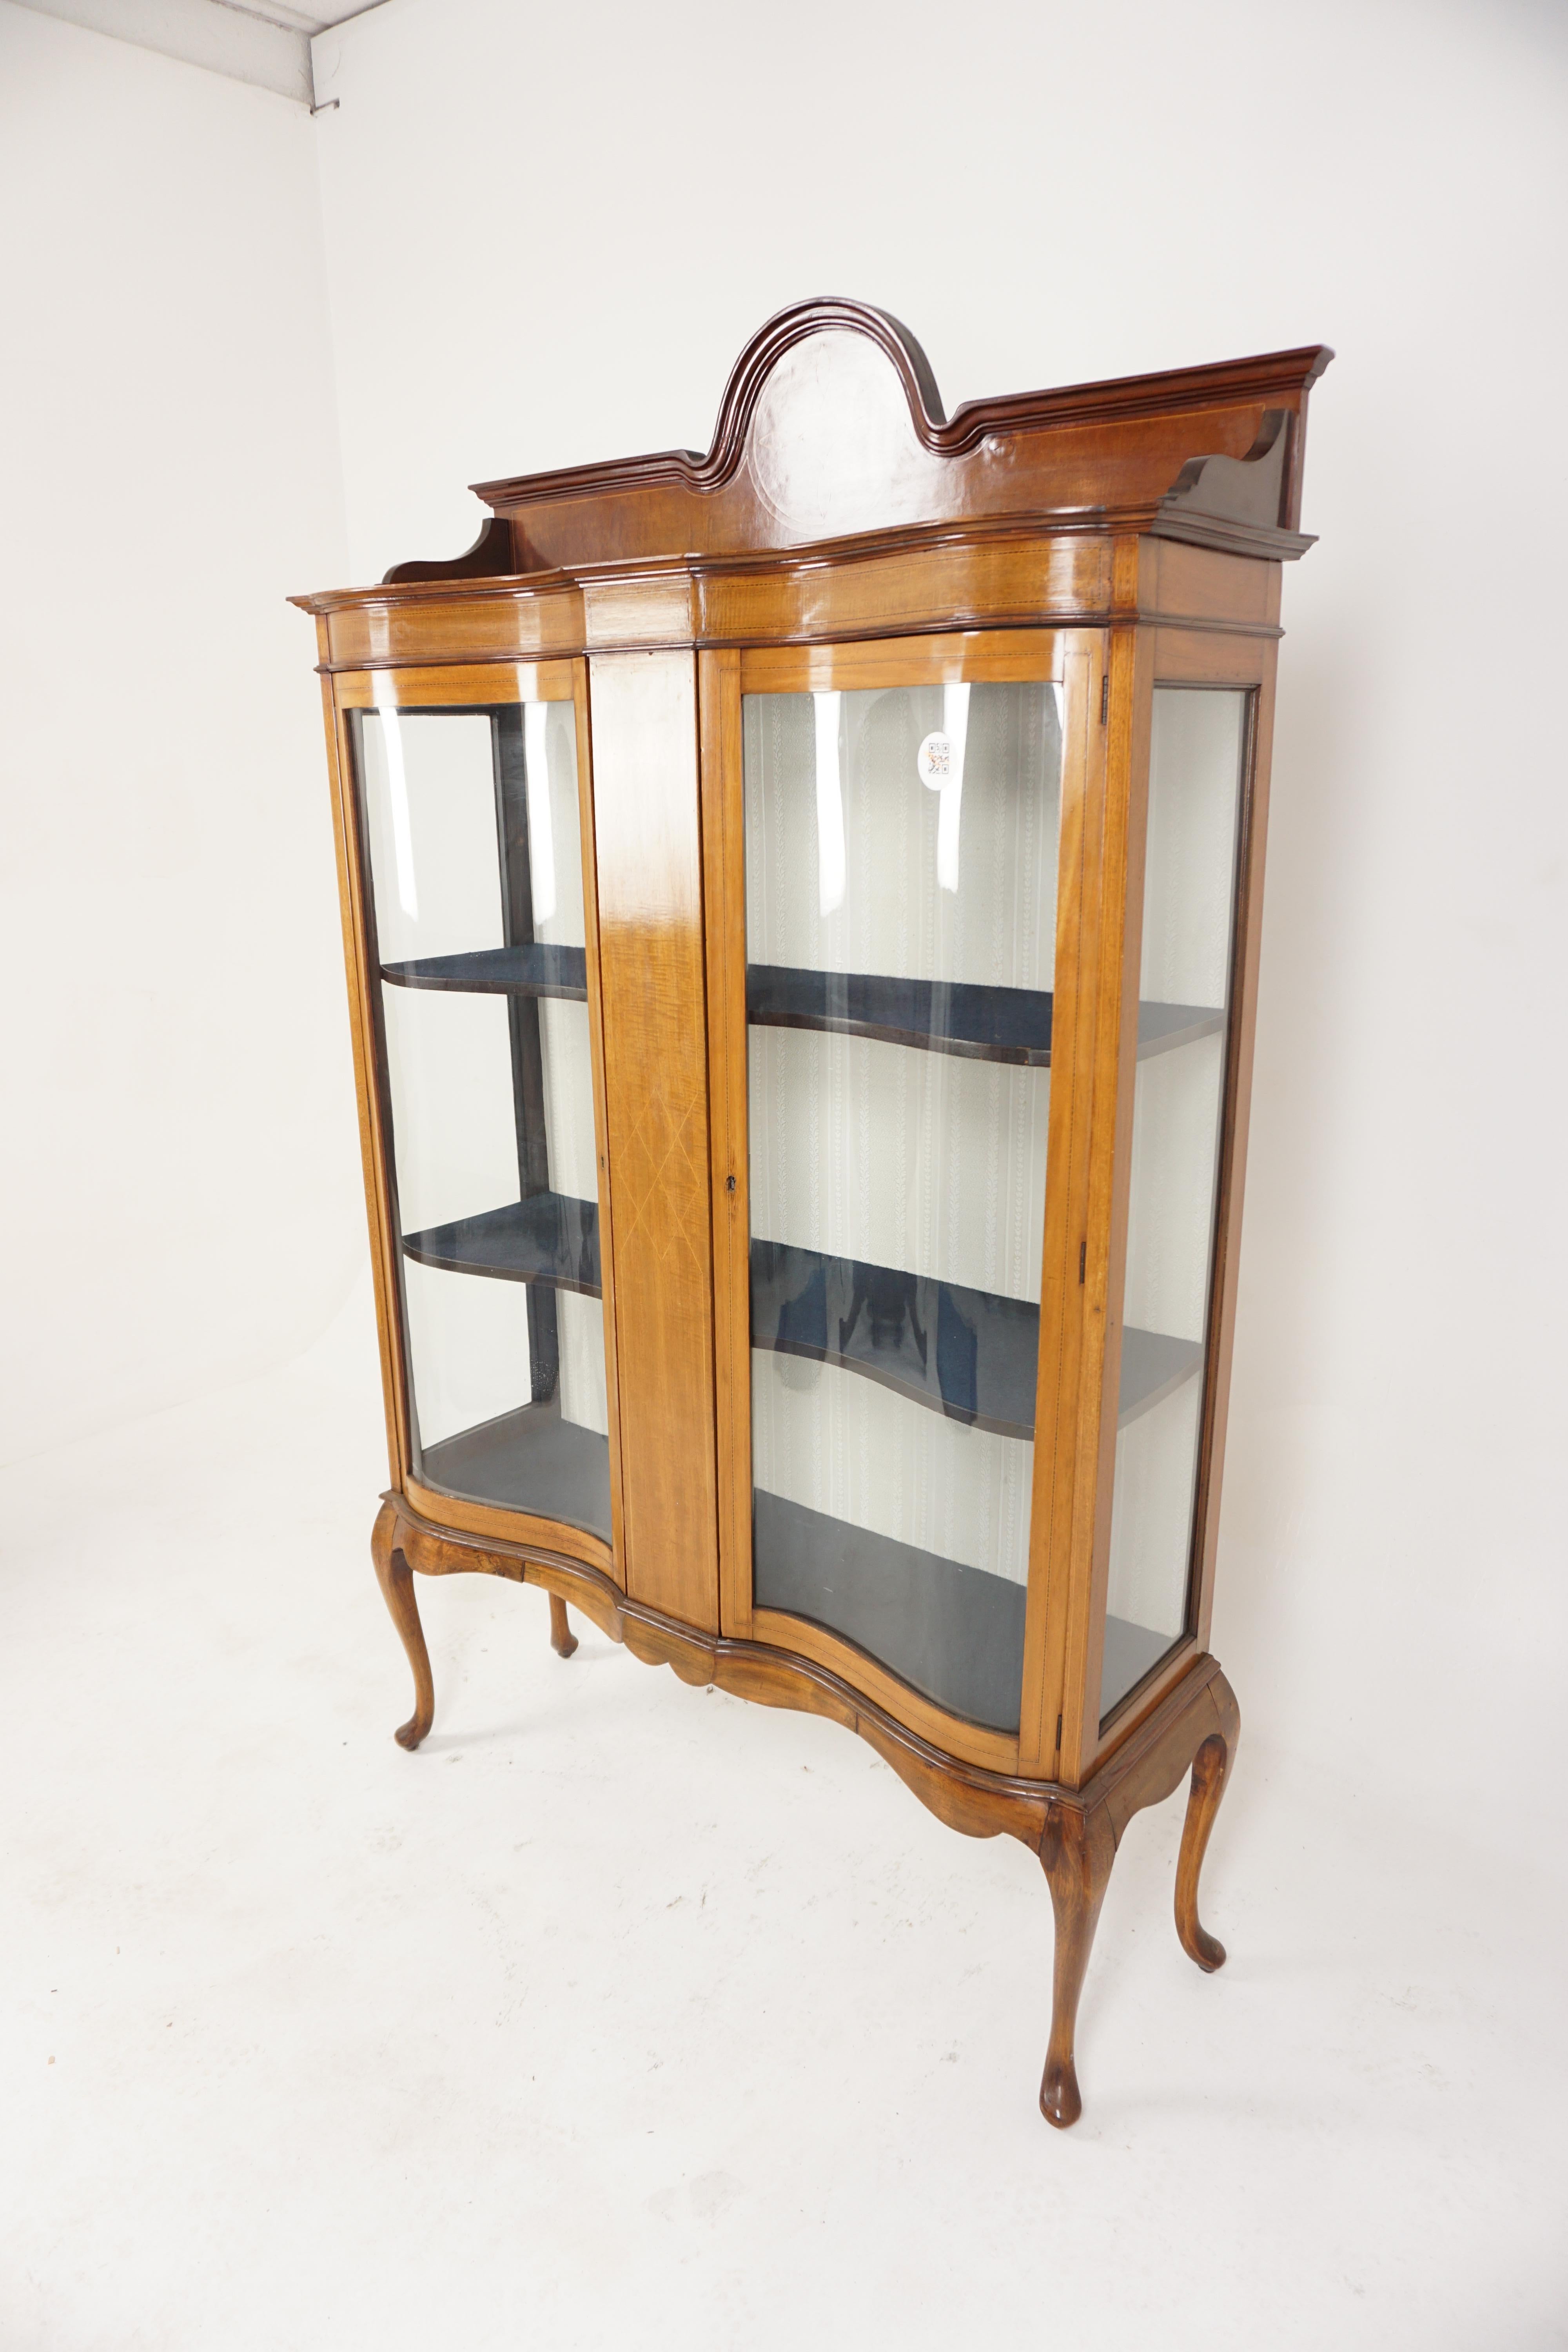 Antique Victorian inlaid walnut display cabinet, China cabinet, Scotland 1900, H076

Scotland 1900
Solid Walnut + Veneers
Original Finish

3 Quarter inlaid gallery on top
Below a pair of curved glass doors
Interior 2 lined shelves
Glass sides
All